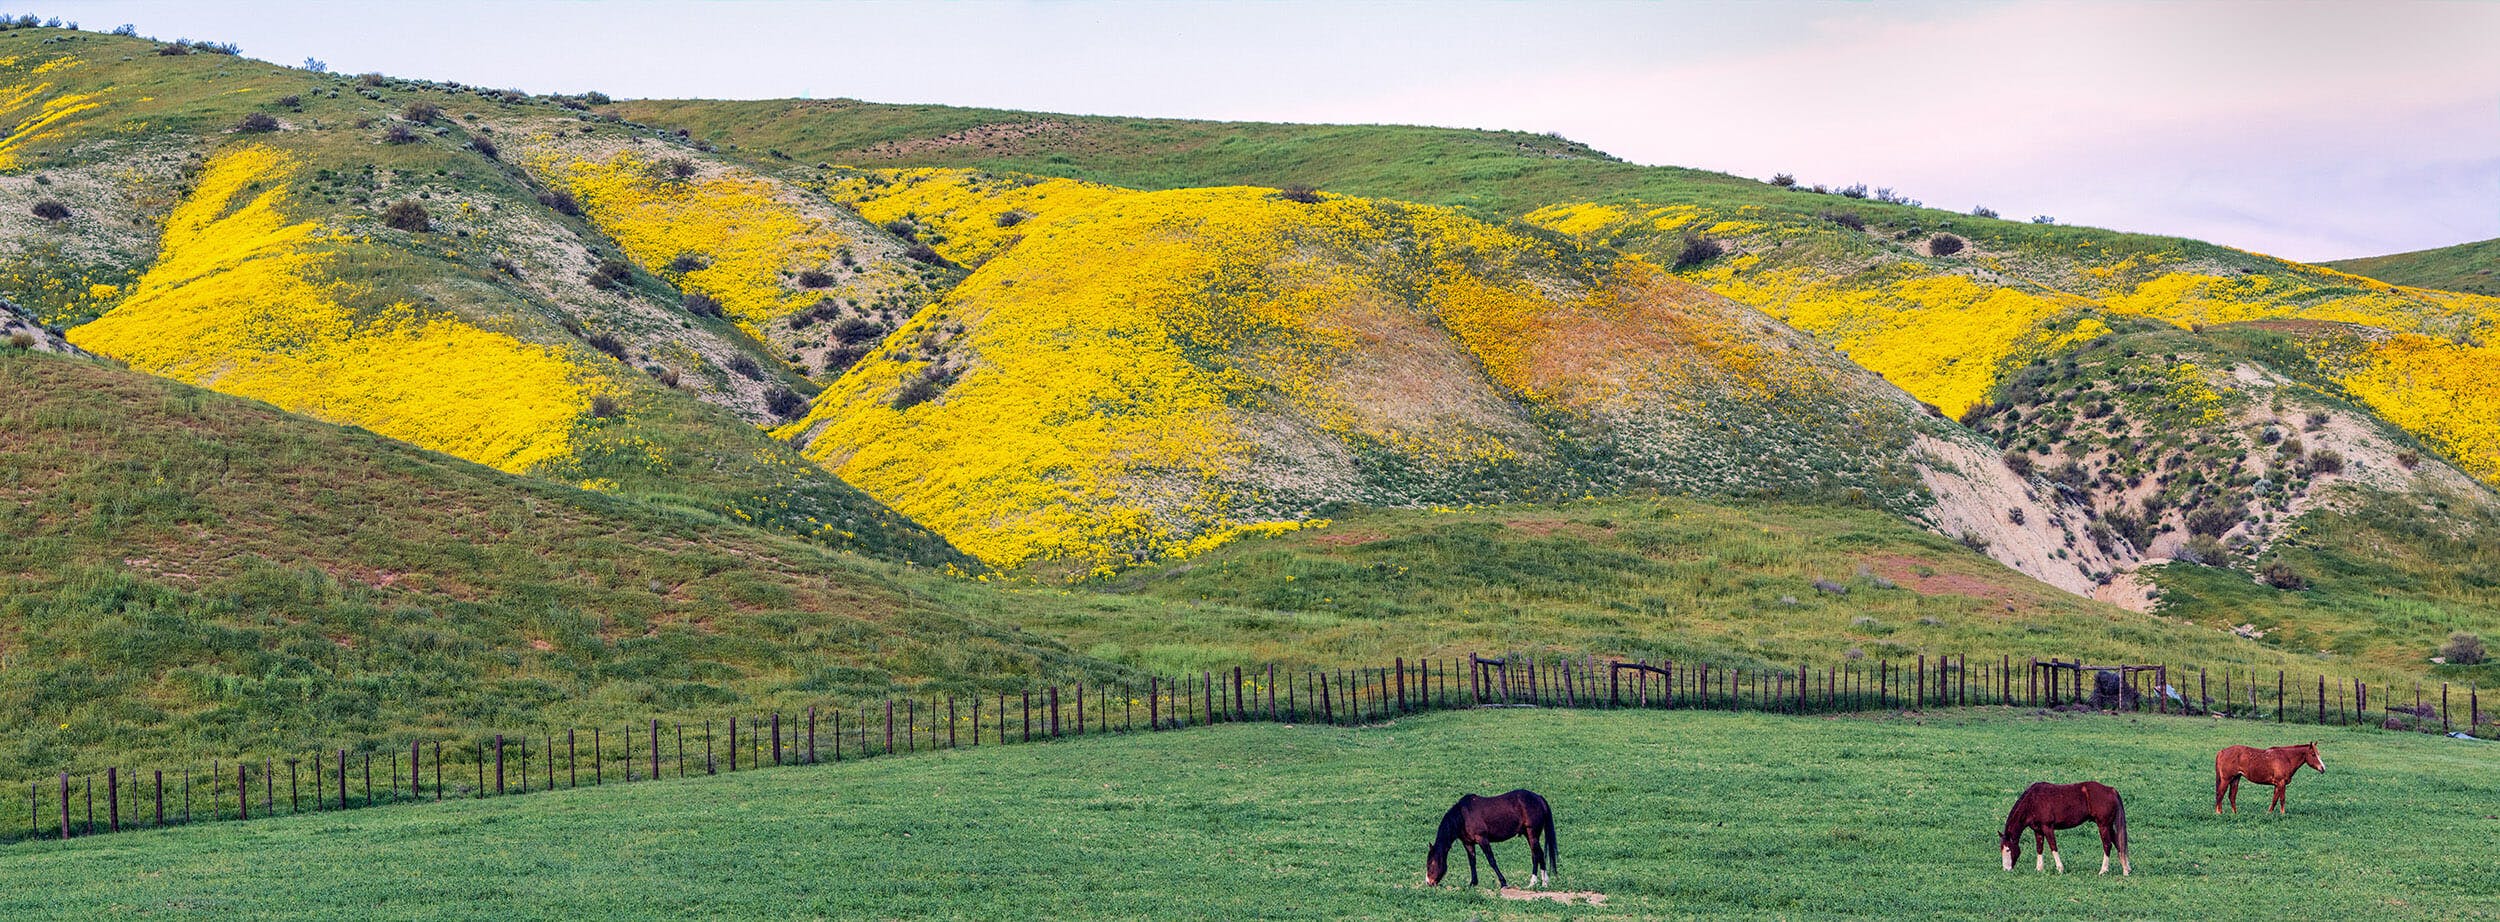 Land Almost Lost: Carrizo Plain National Monument